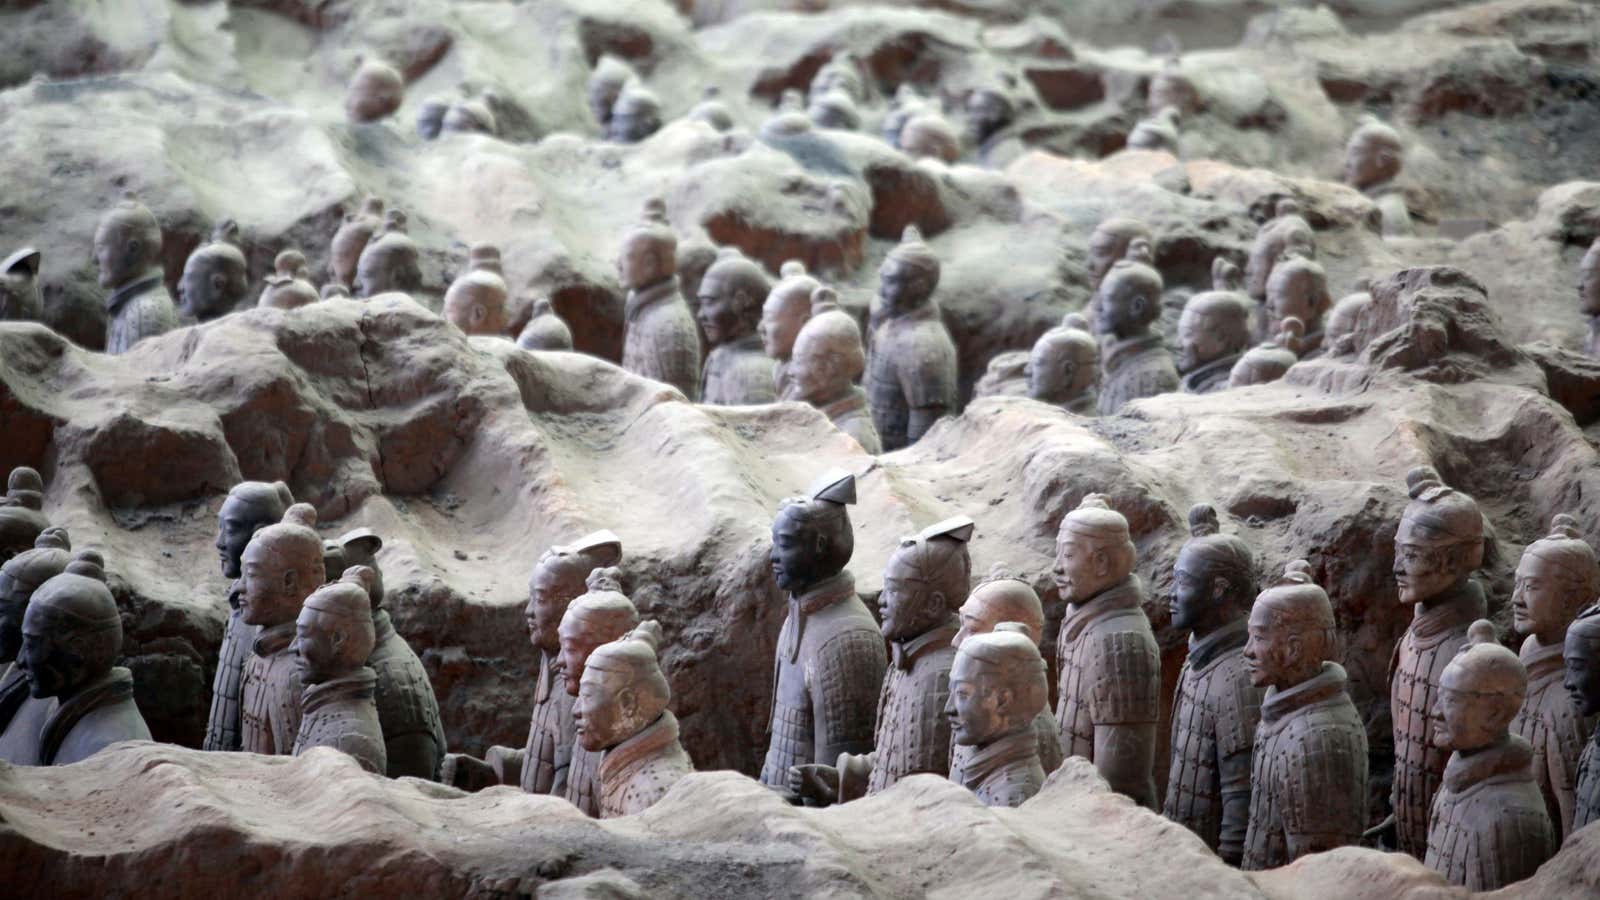 “And these are the Terracotta Warriors.”